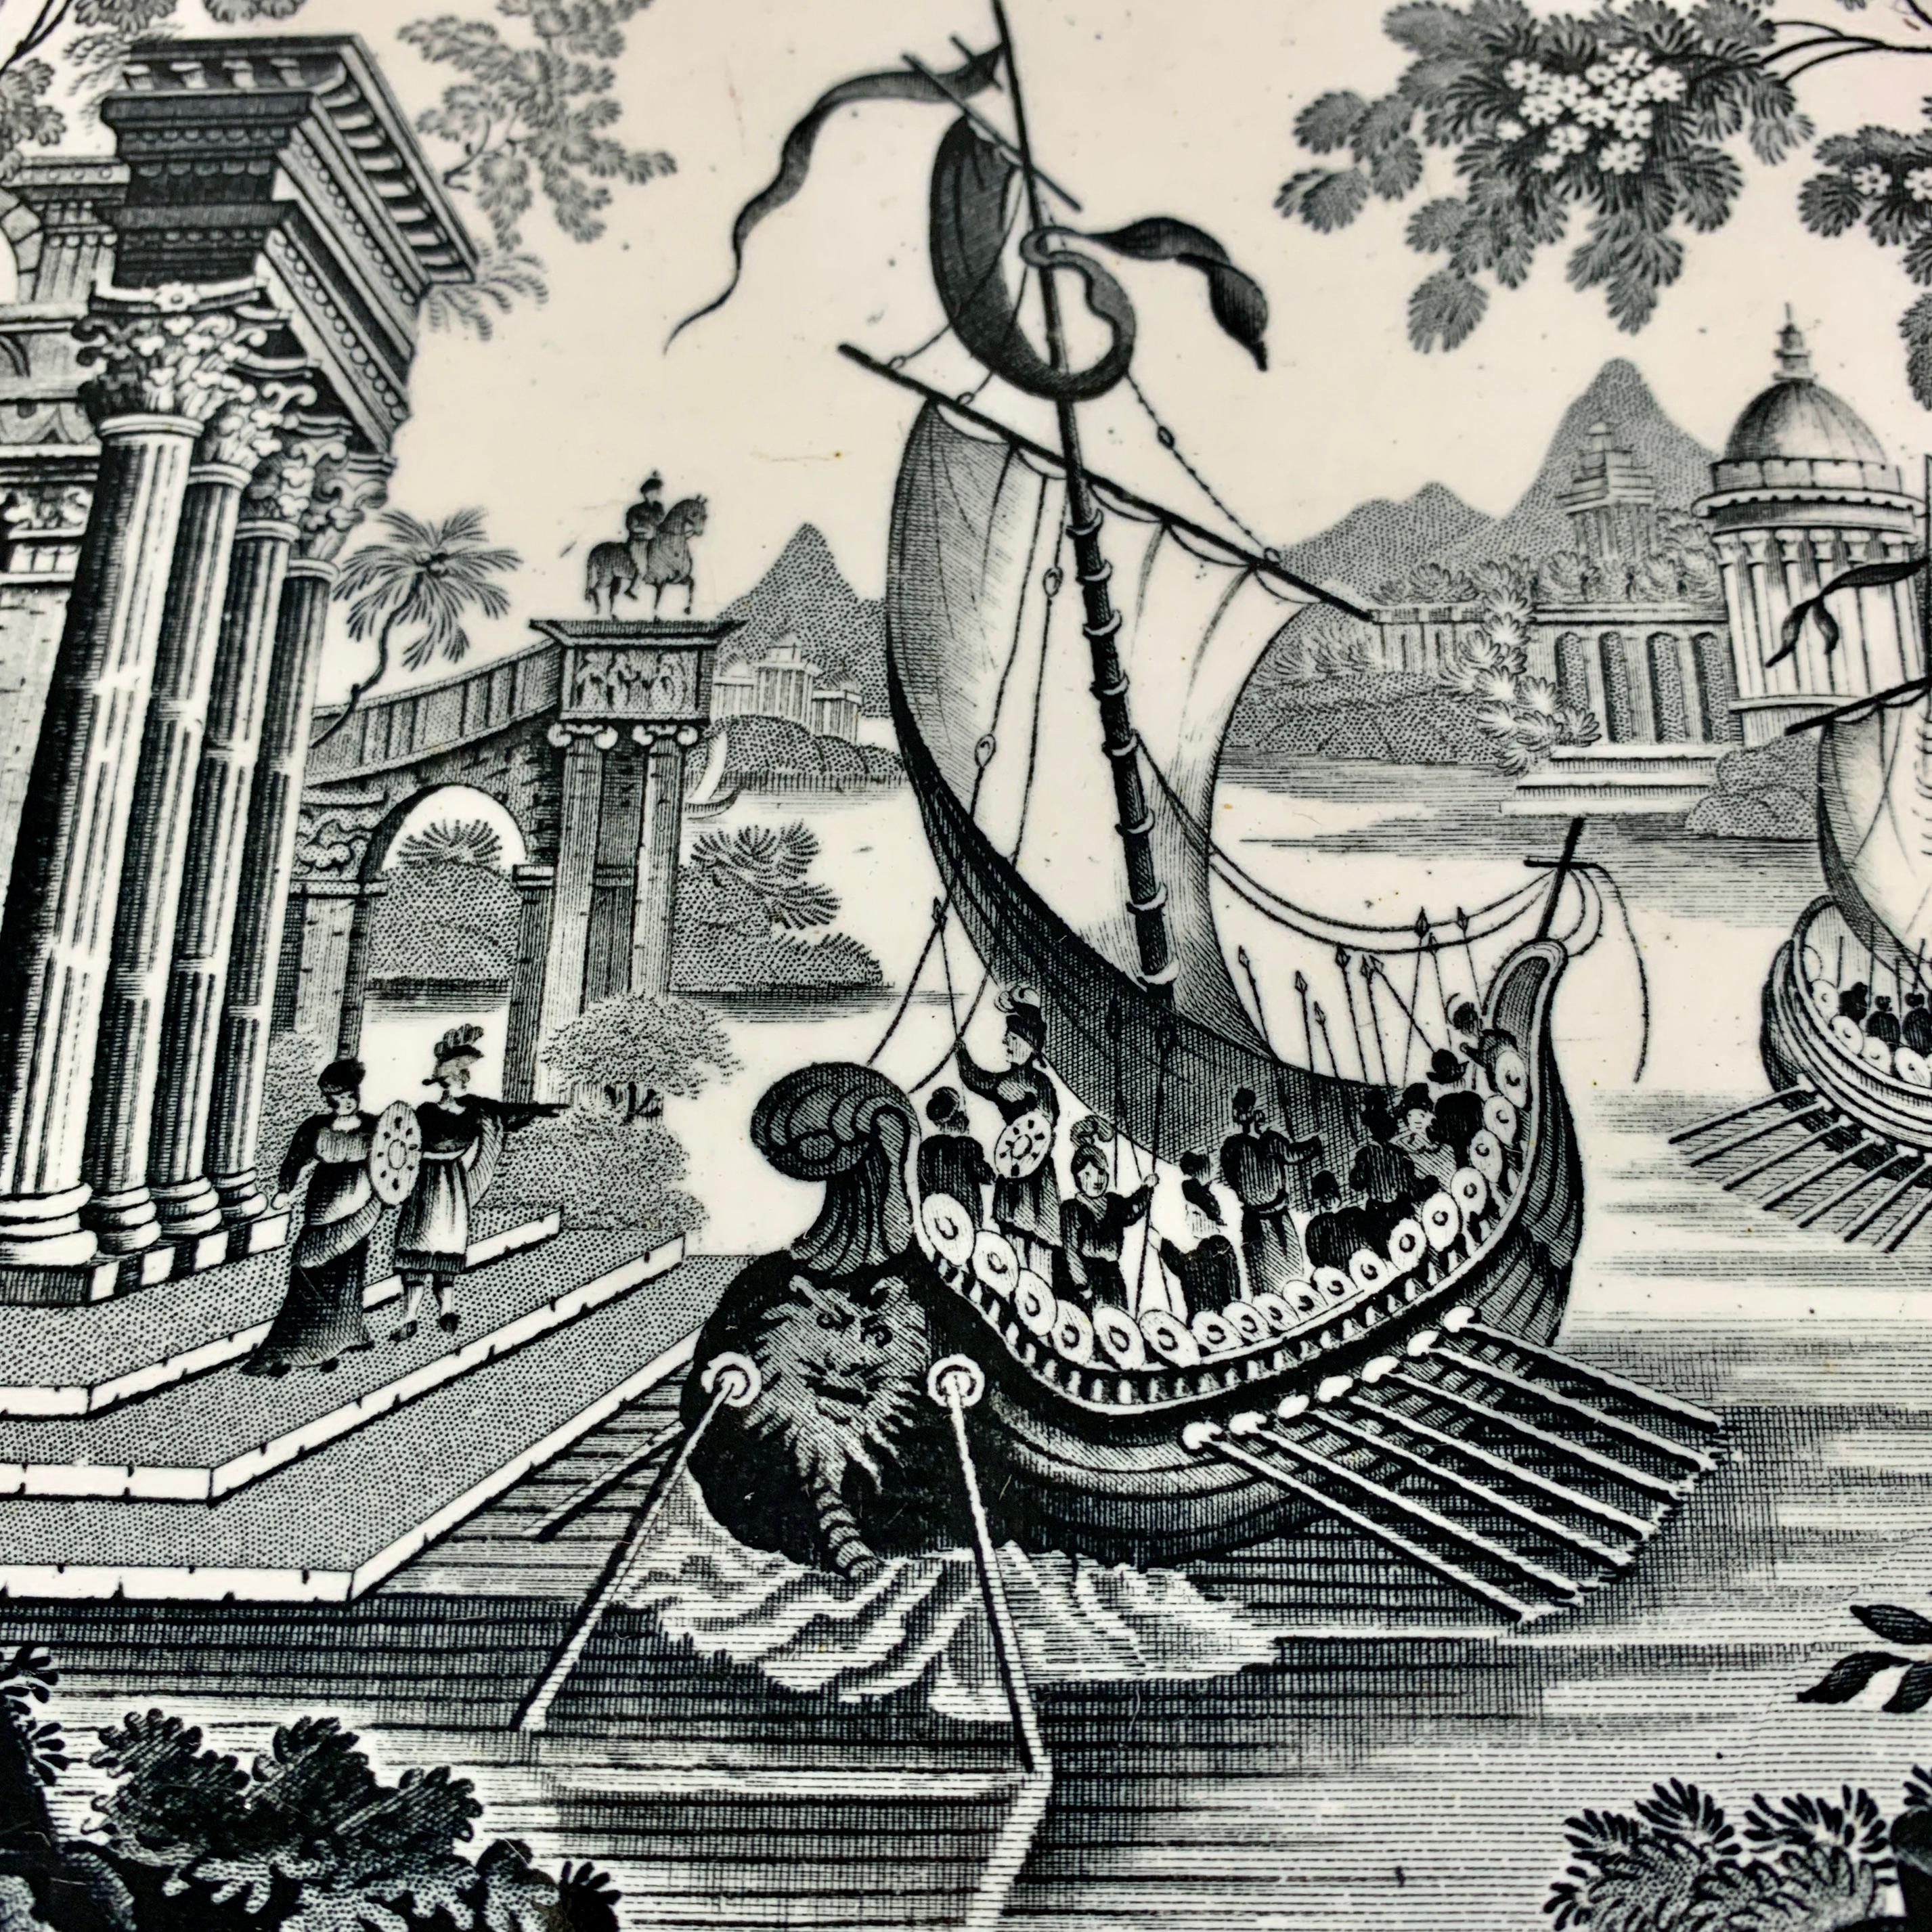 A transferware platter by Thomas Mayer, Stoke-on-Trent, Staffordshire, Circa 1826-1838.

From the Oriental Scenery series, a black transfer on a white earthenware body, showing exotic sailing vessels filled with oarsmen preparing to dock beside